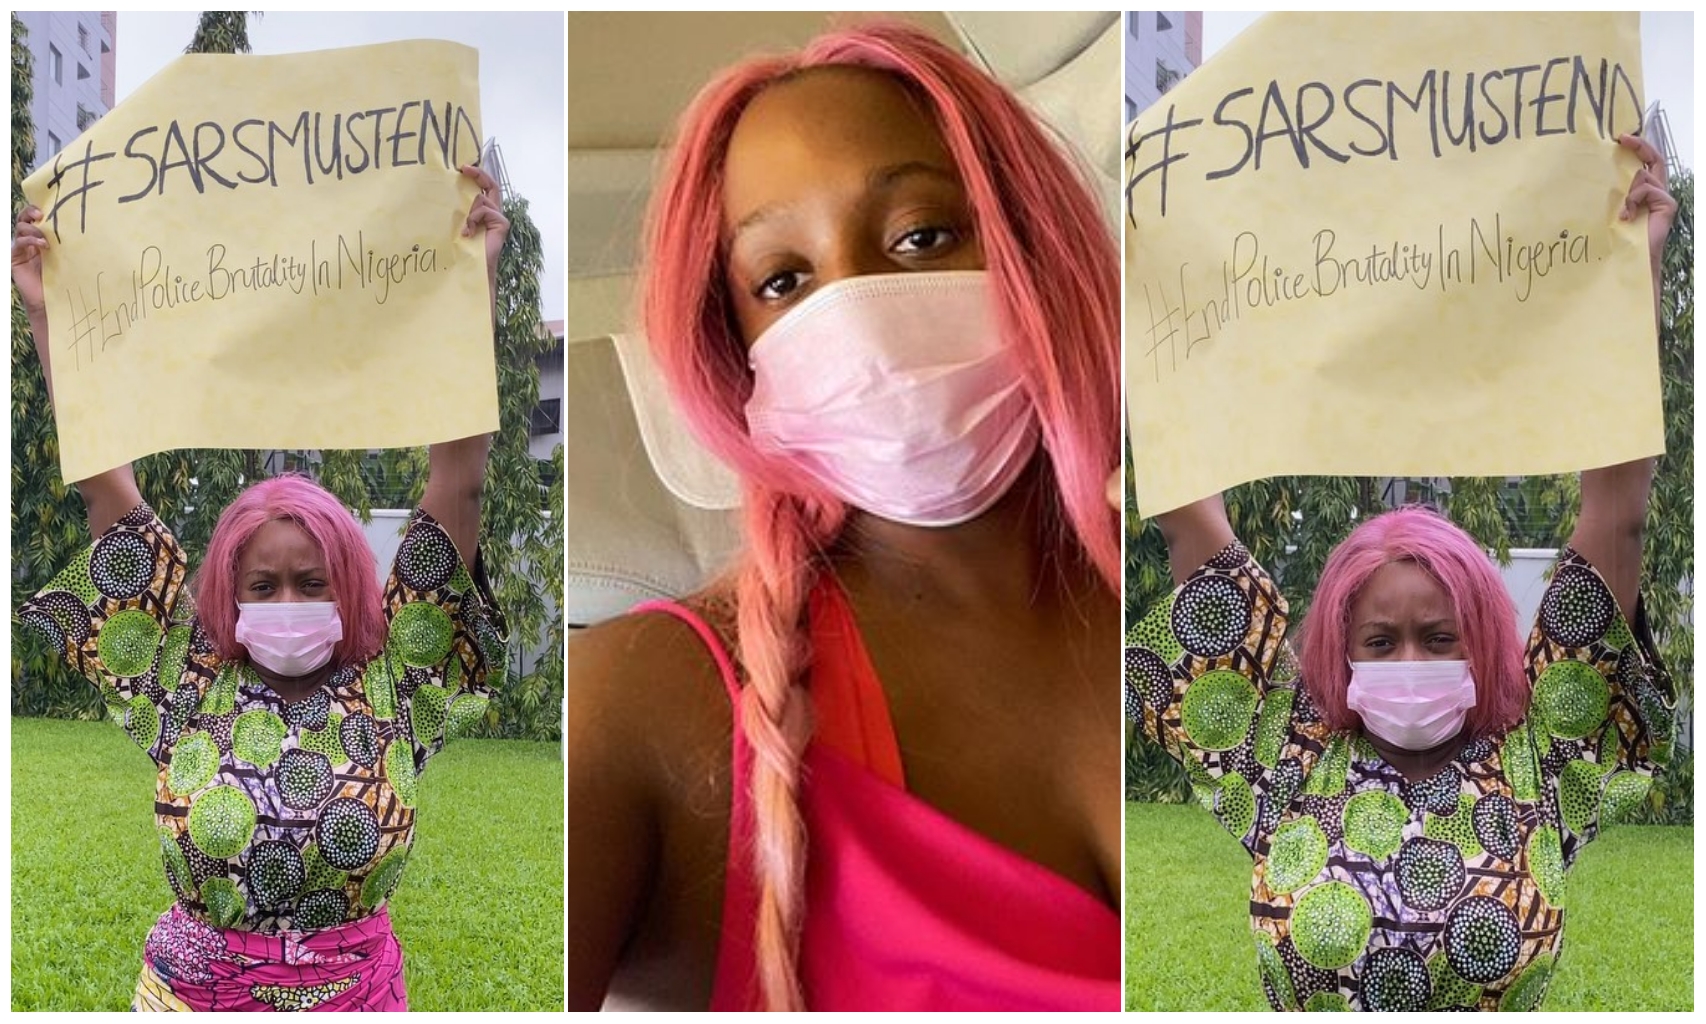 DJ Cuppy joins EndSars movement, protest under rain while self-isolating (Video)